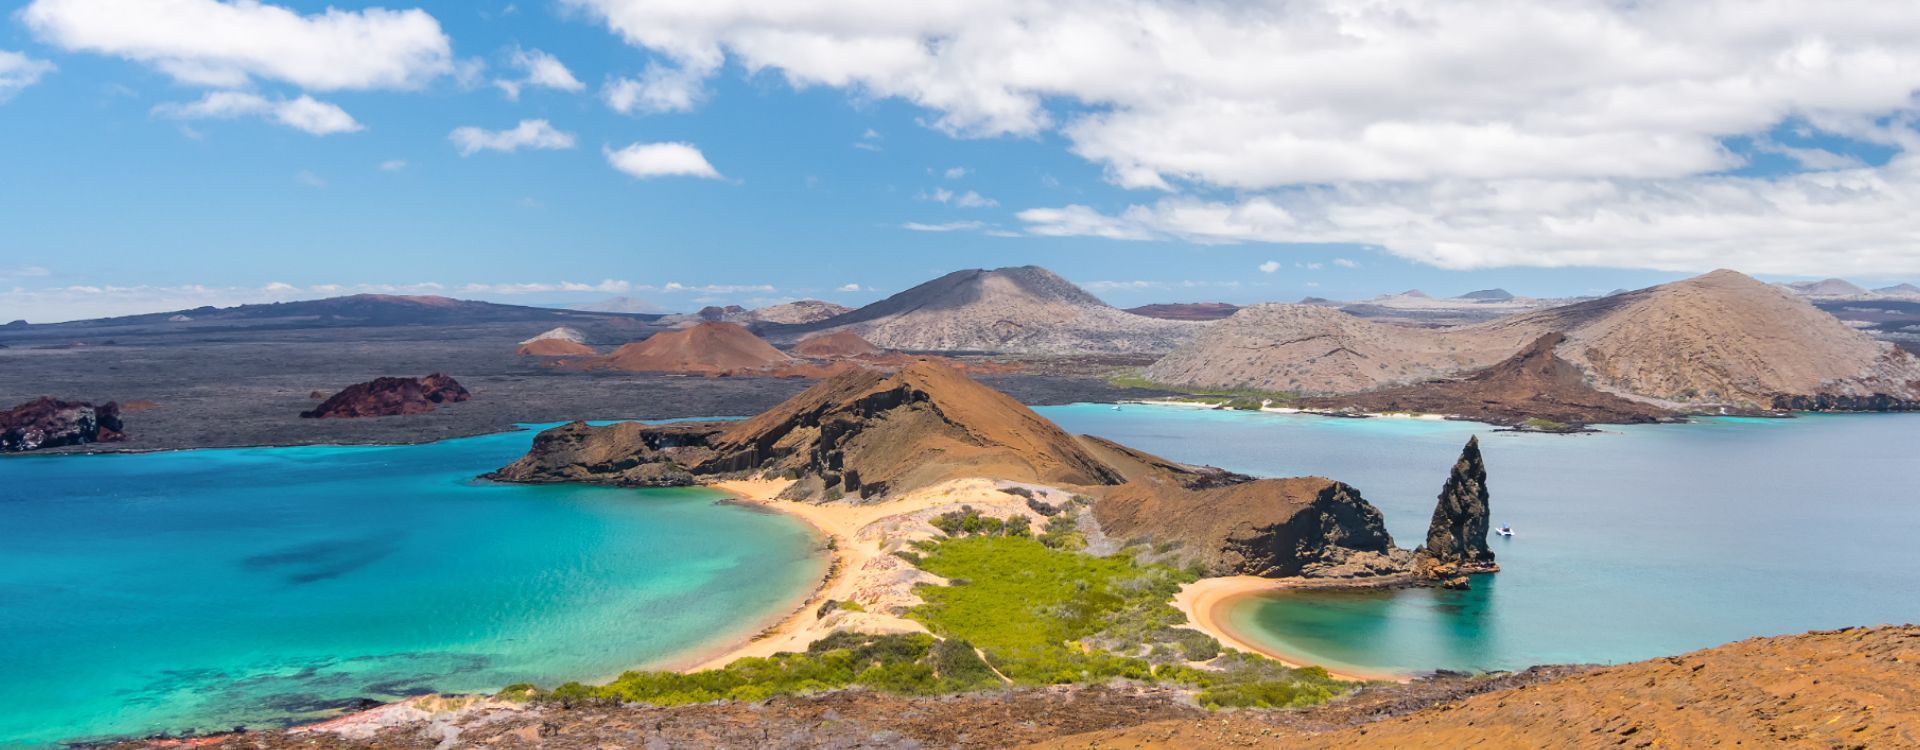 a small island in the middle of a large body of water surrounded by mountains  in the Galapagos